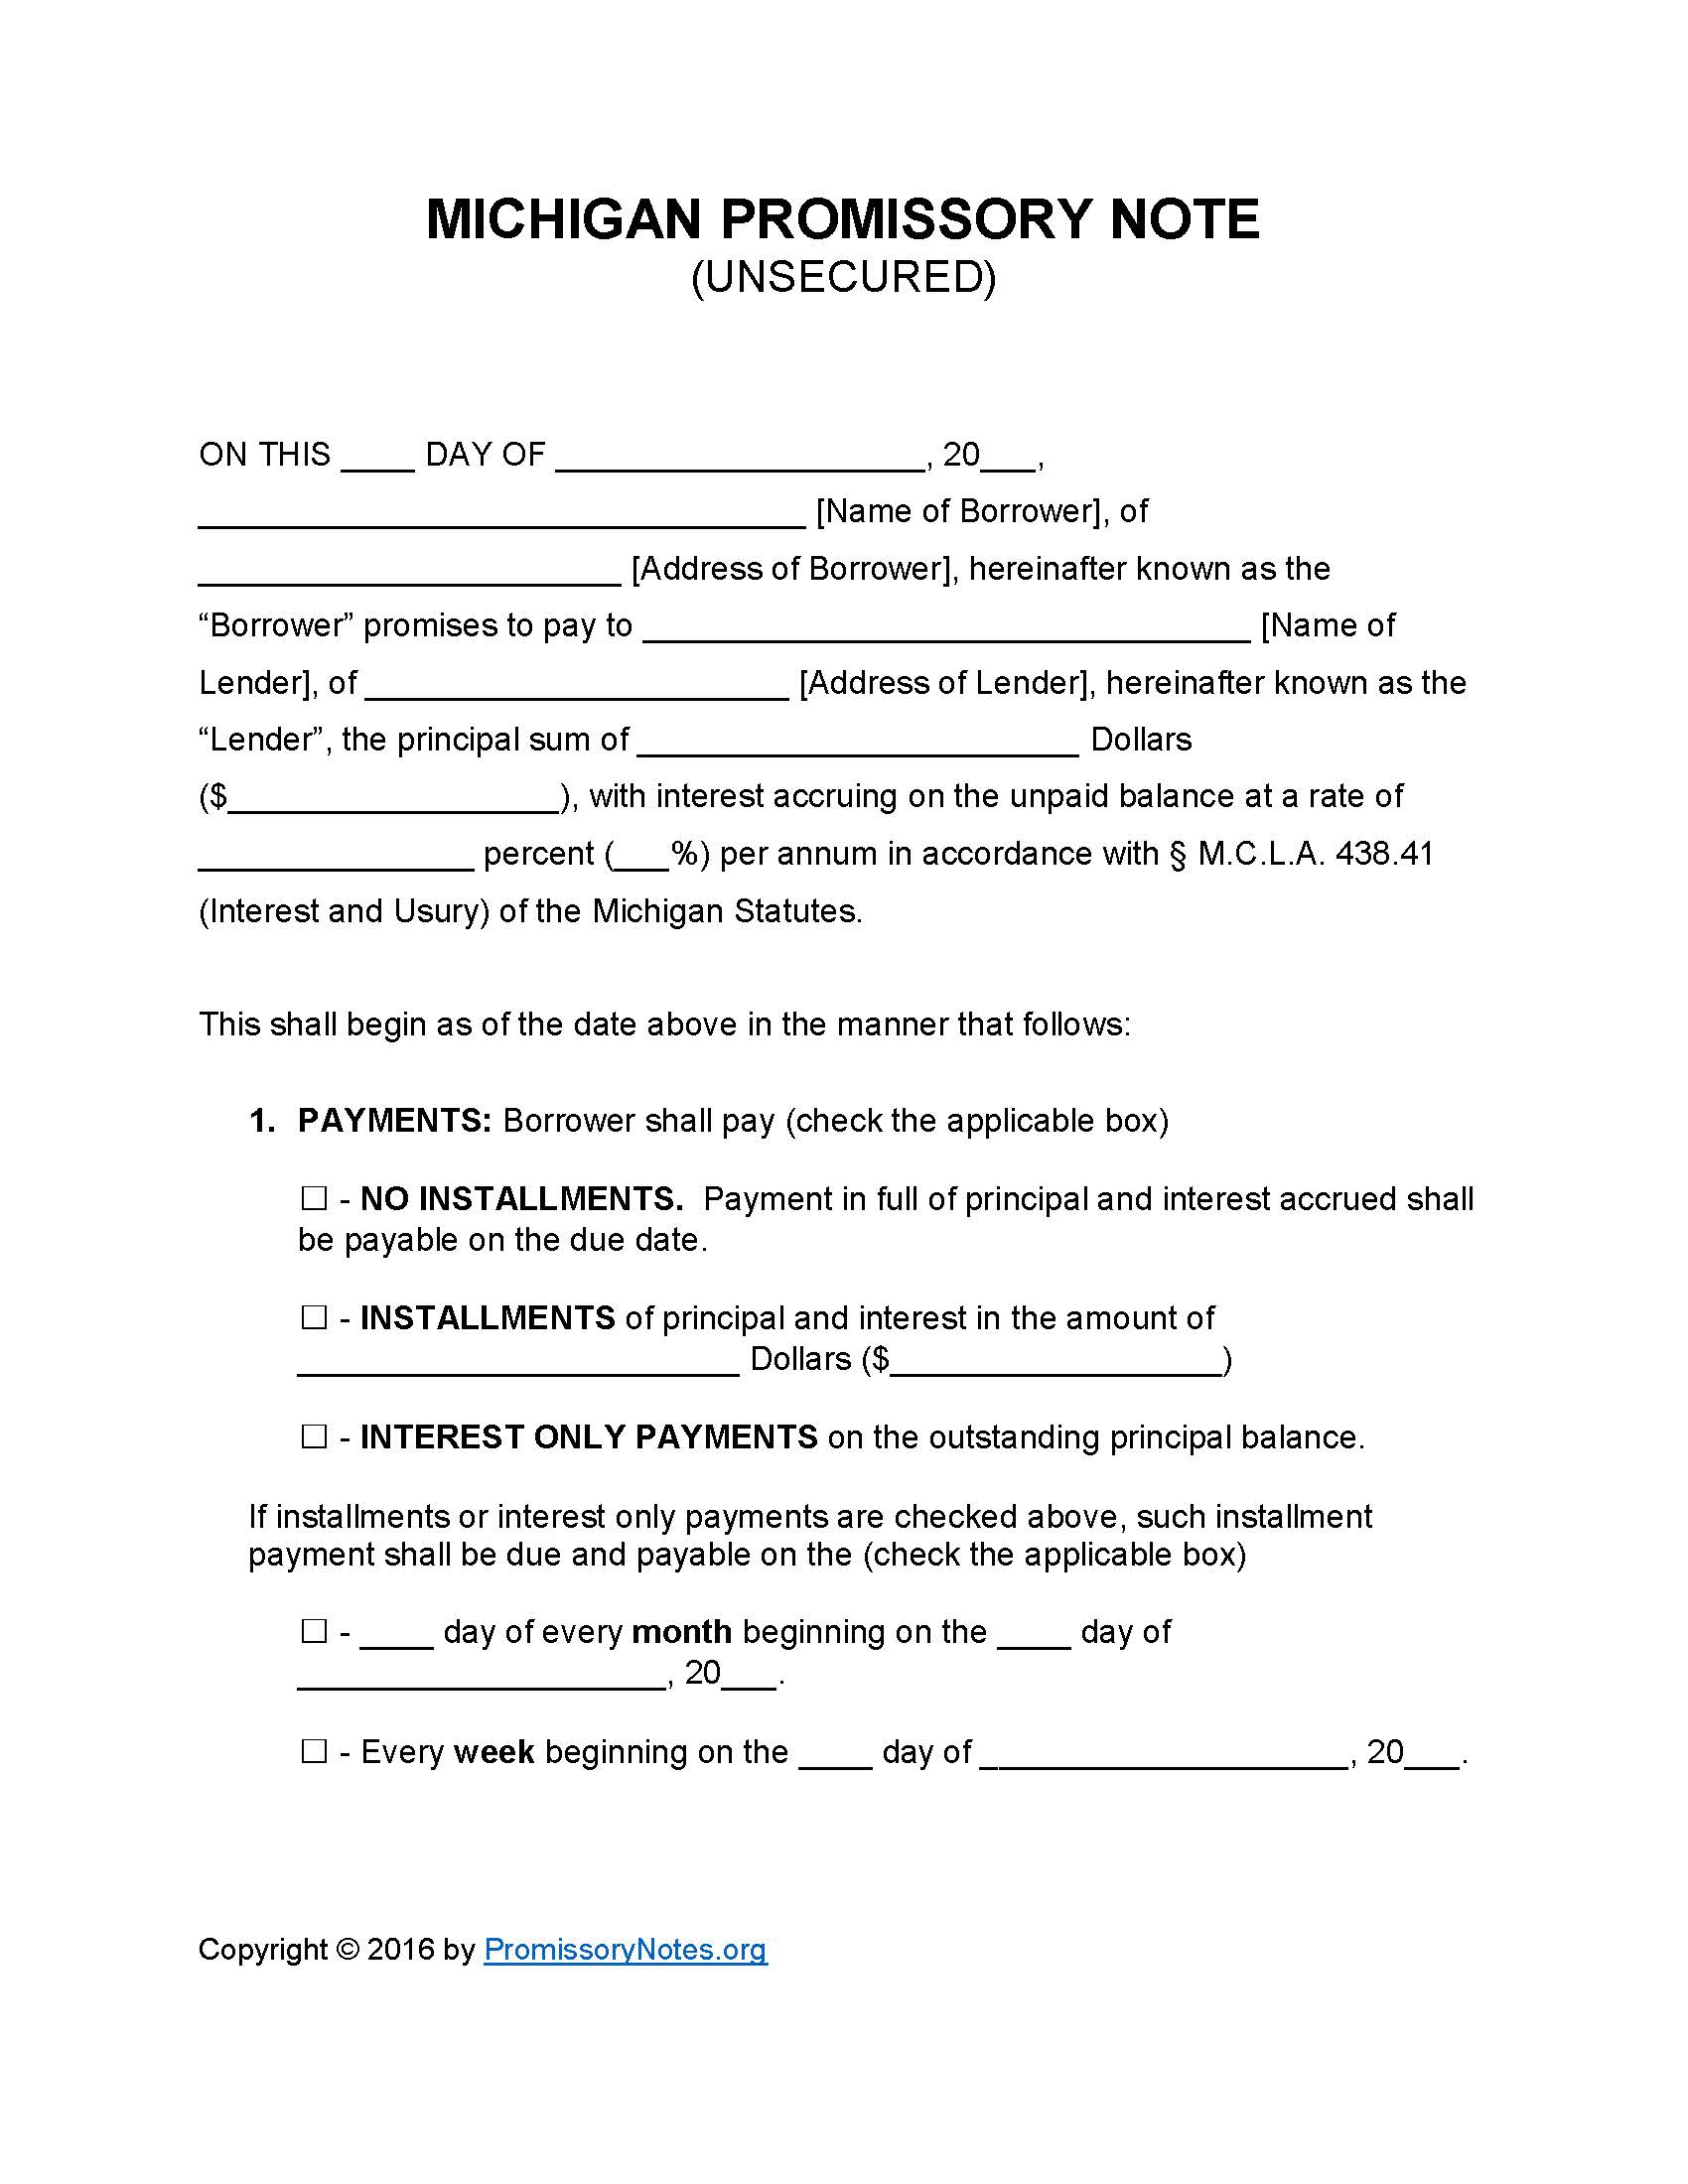 Michigan Unsecured Promissory Note Template - Promissory Notes With Regard To Loan Promissory Note Template